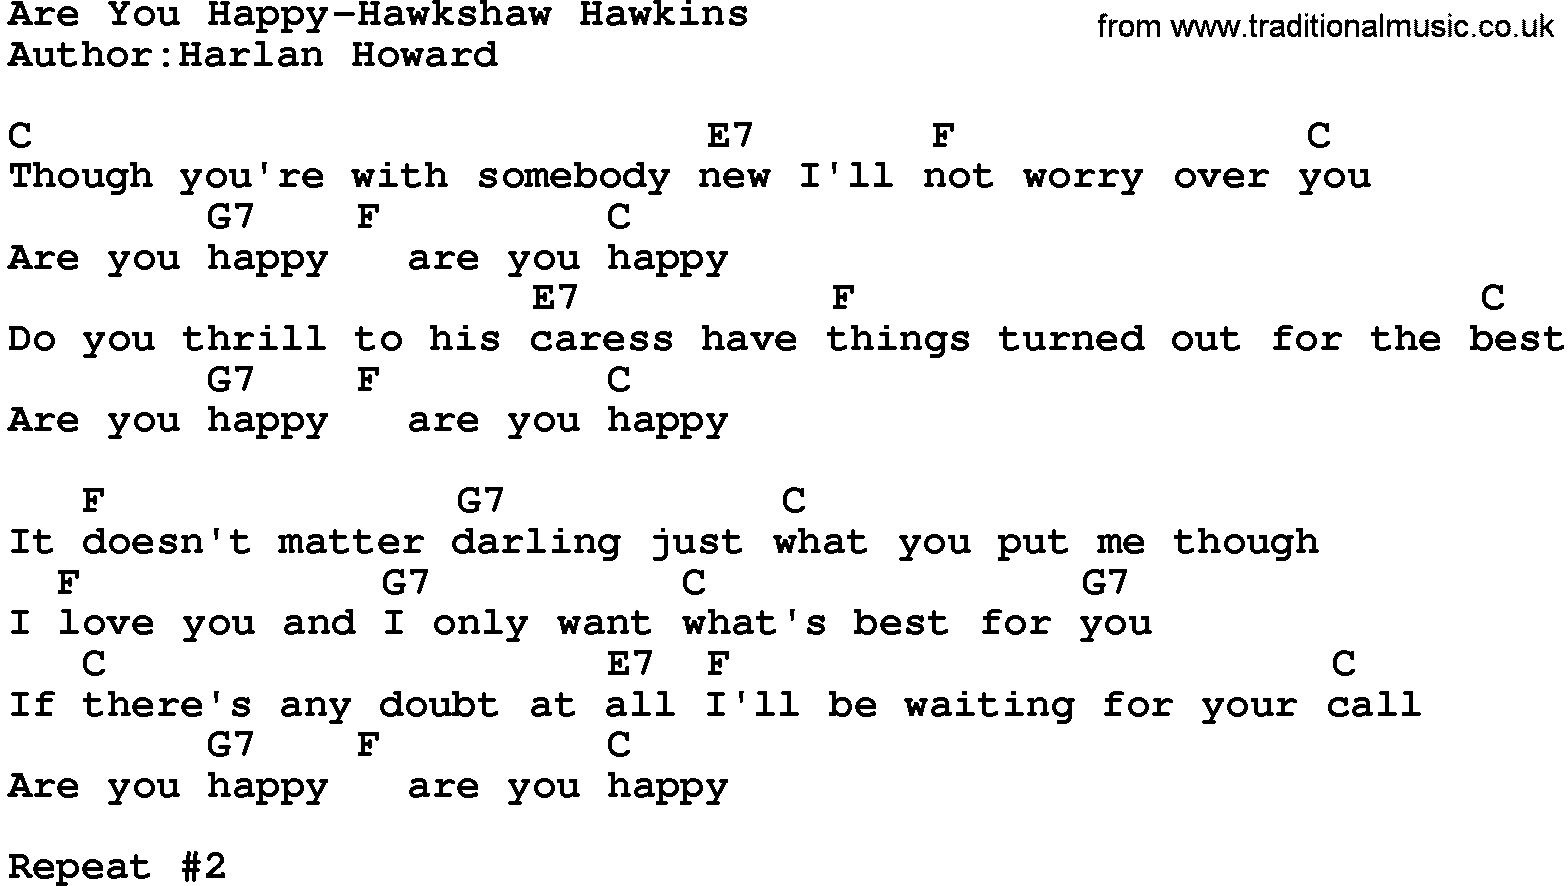 Country music song: Are You Happy-Hawkshaw Hawkins lyrics and chords